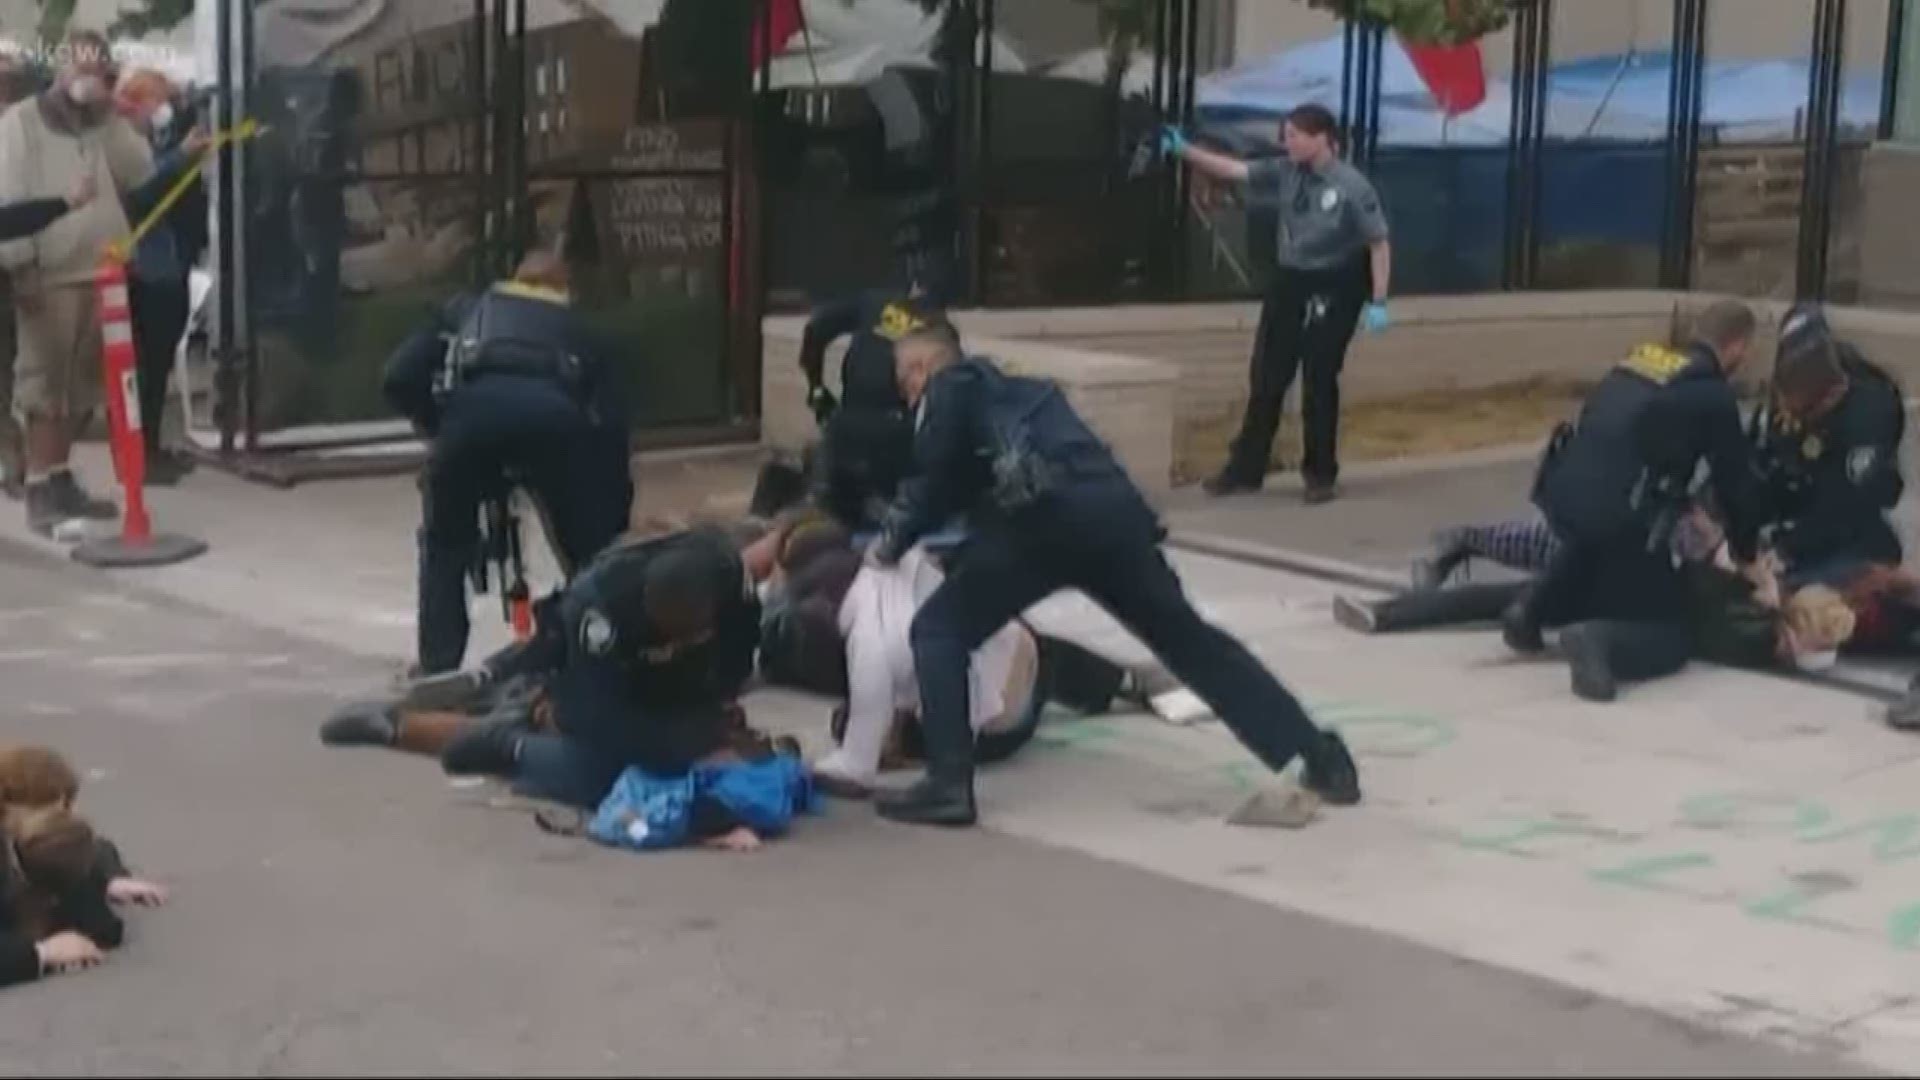 8 protesters were arrested during a confrontation.